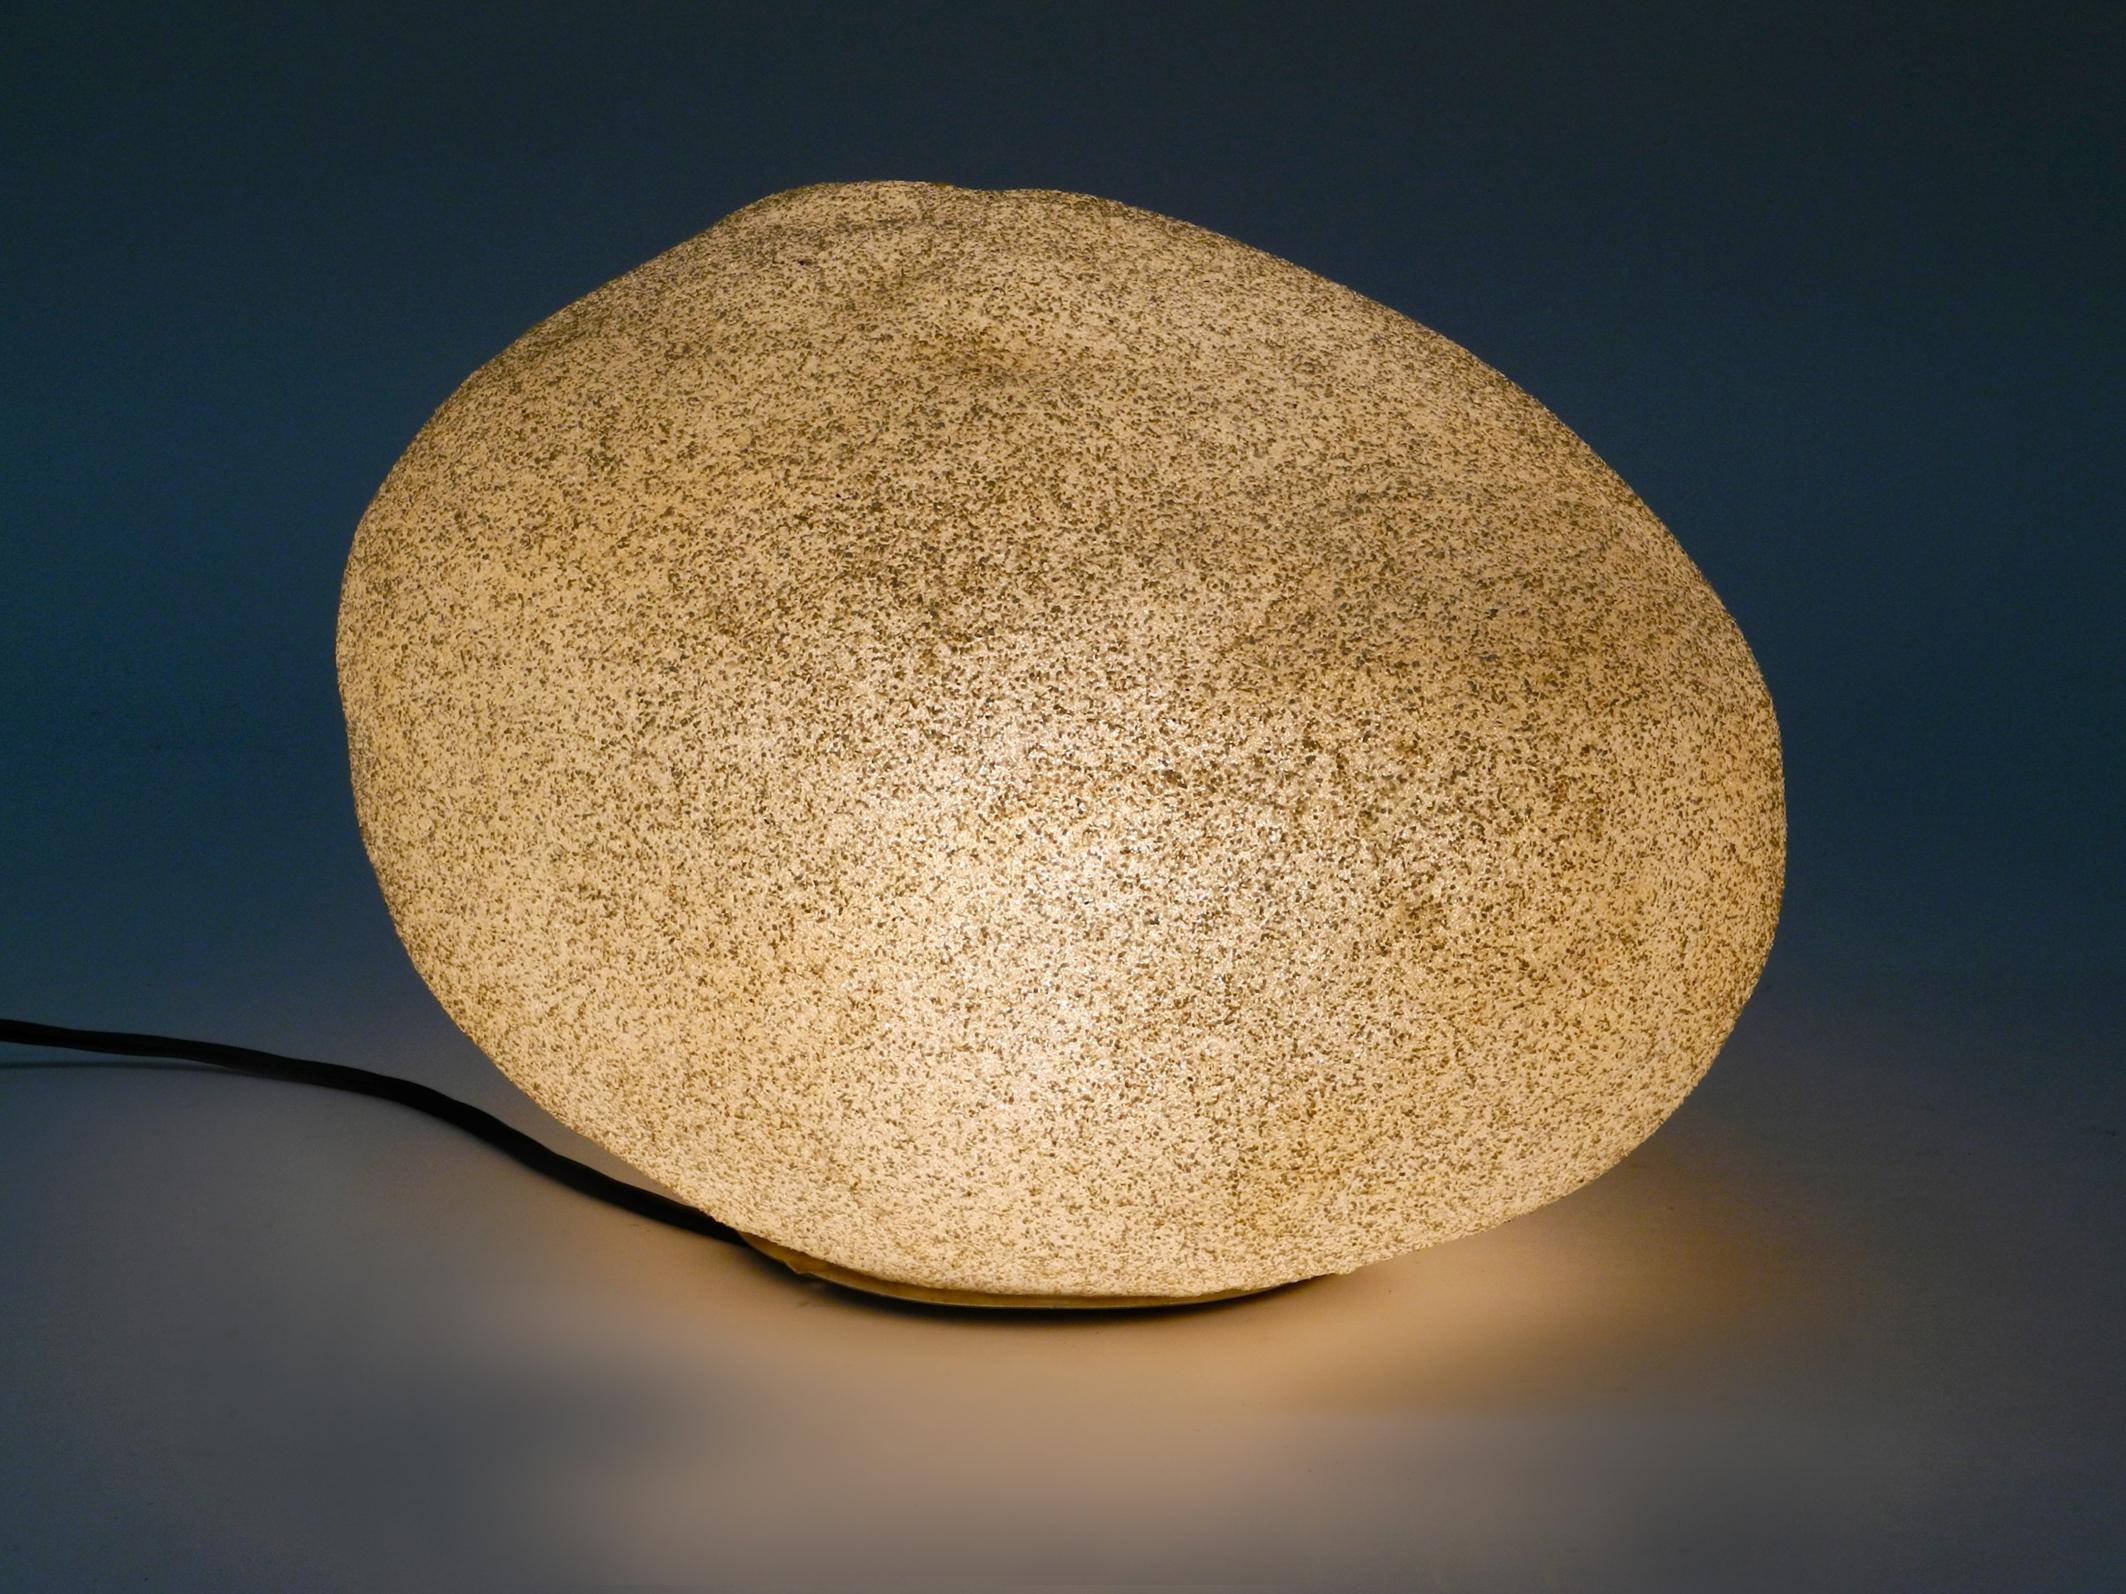 German XL Tecta 1960s Floor Lamp Made of Fiberglass in the Shape of a Stone or Rock